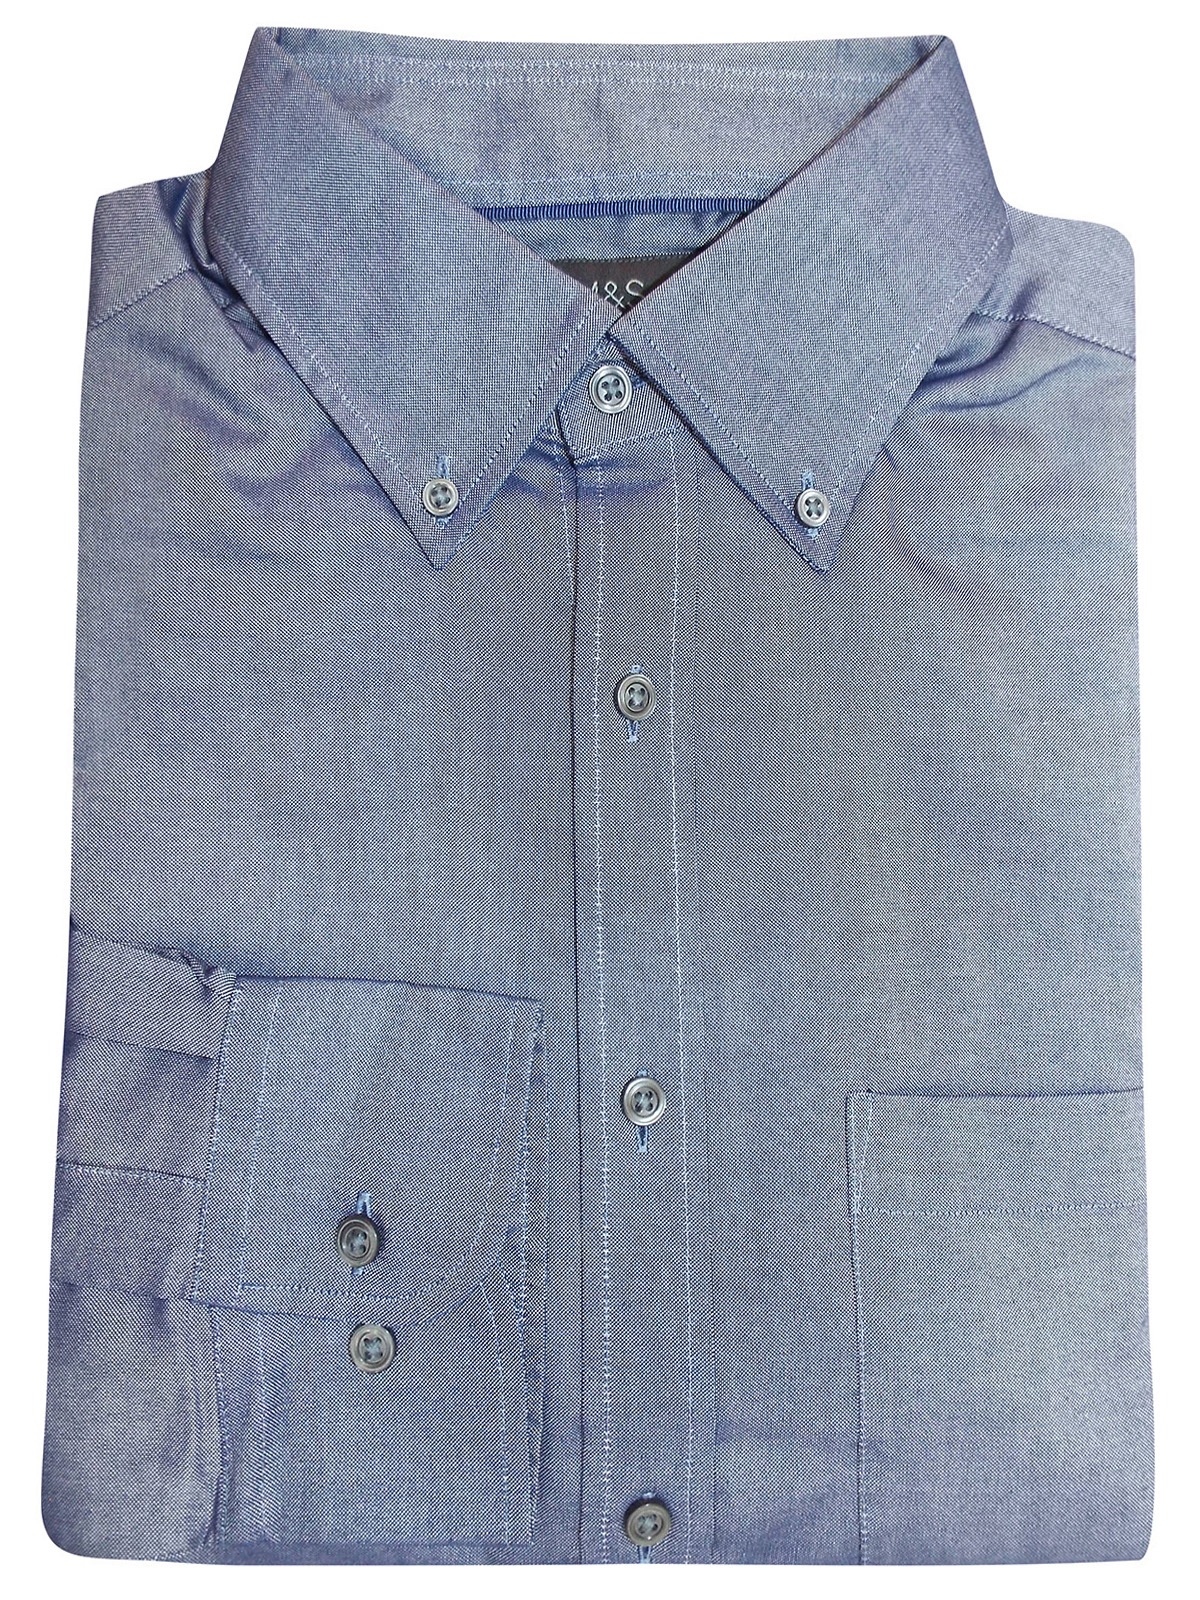 Marks and Spencer - - M&5 DENIM-BLUE Pure Cotton Button Collar Long ...